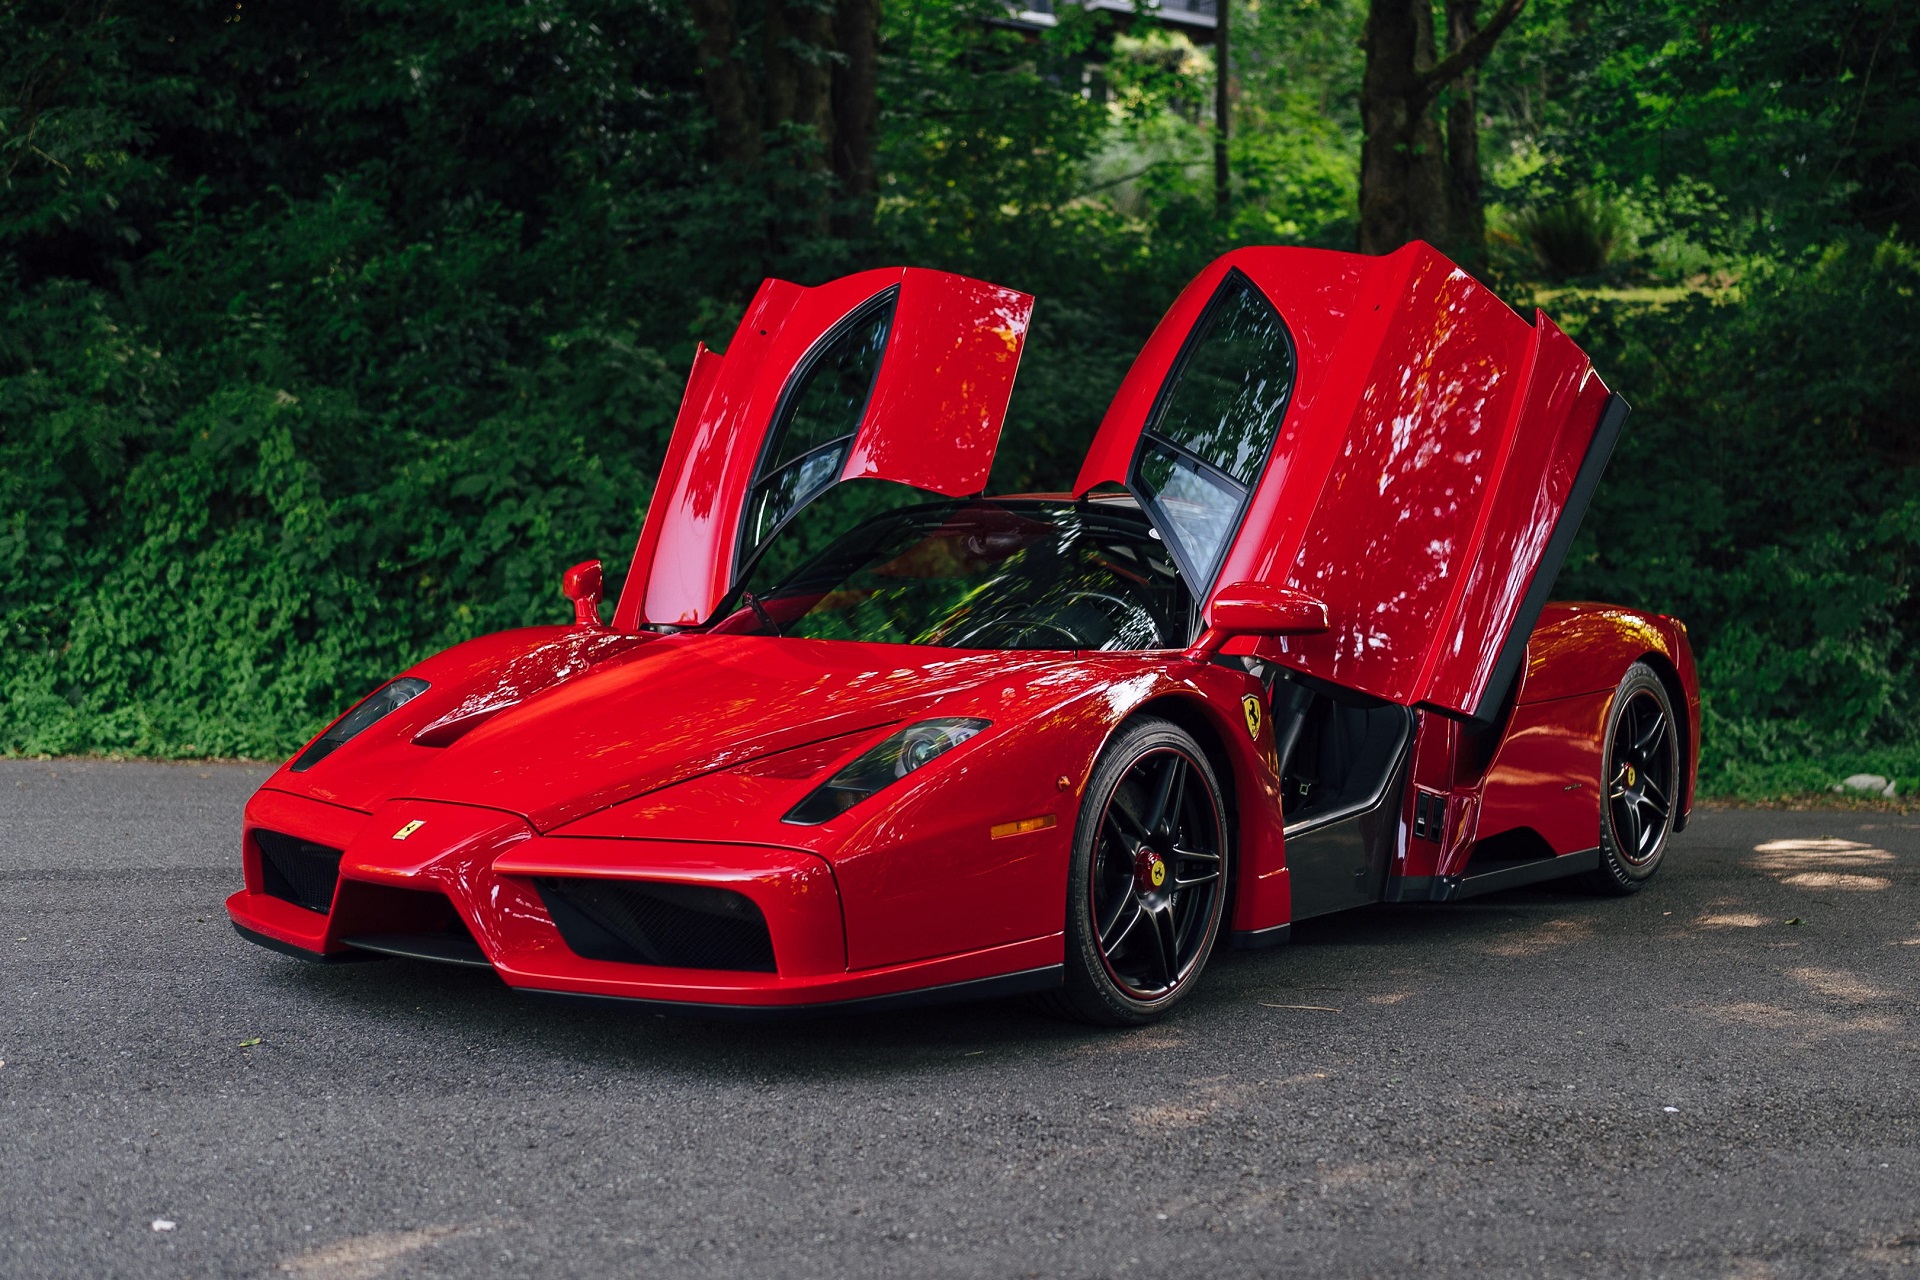 front-angled view of the red 2003 Ferrari Enzo with the doors open.